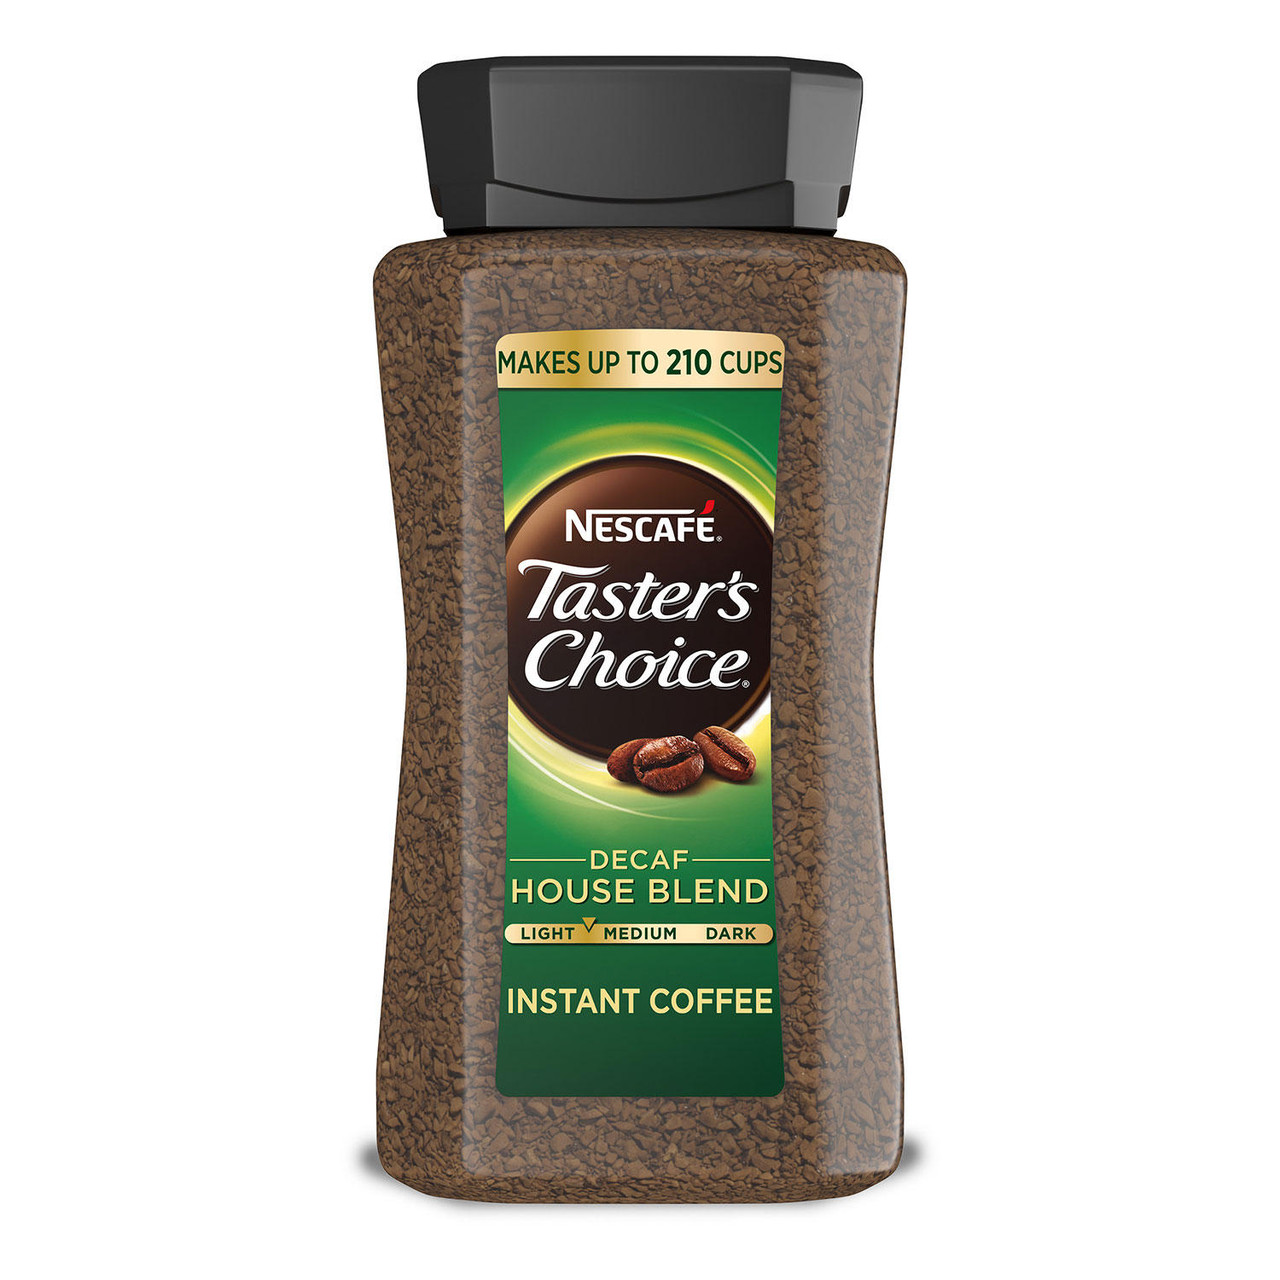 NESCAFE Taster's Choice Decaf House Blend Instant Coffee (14 oz.) - [From 66.00 - Choose pk Qty ] - *Ships from Miami